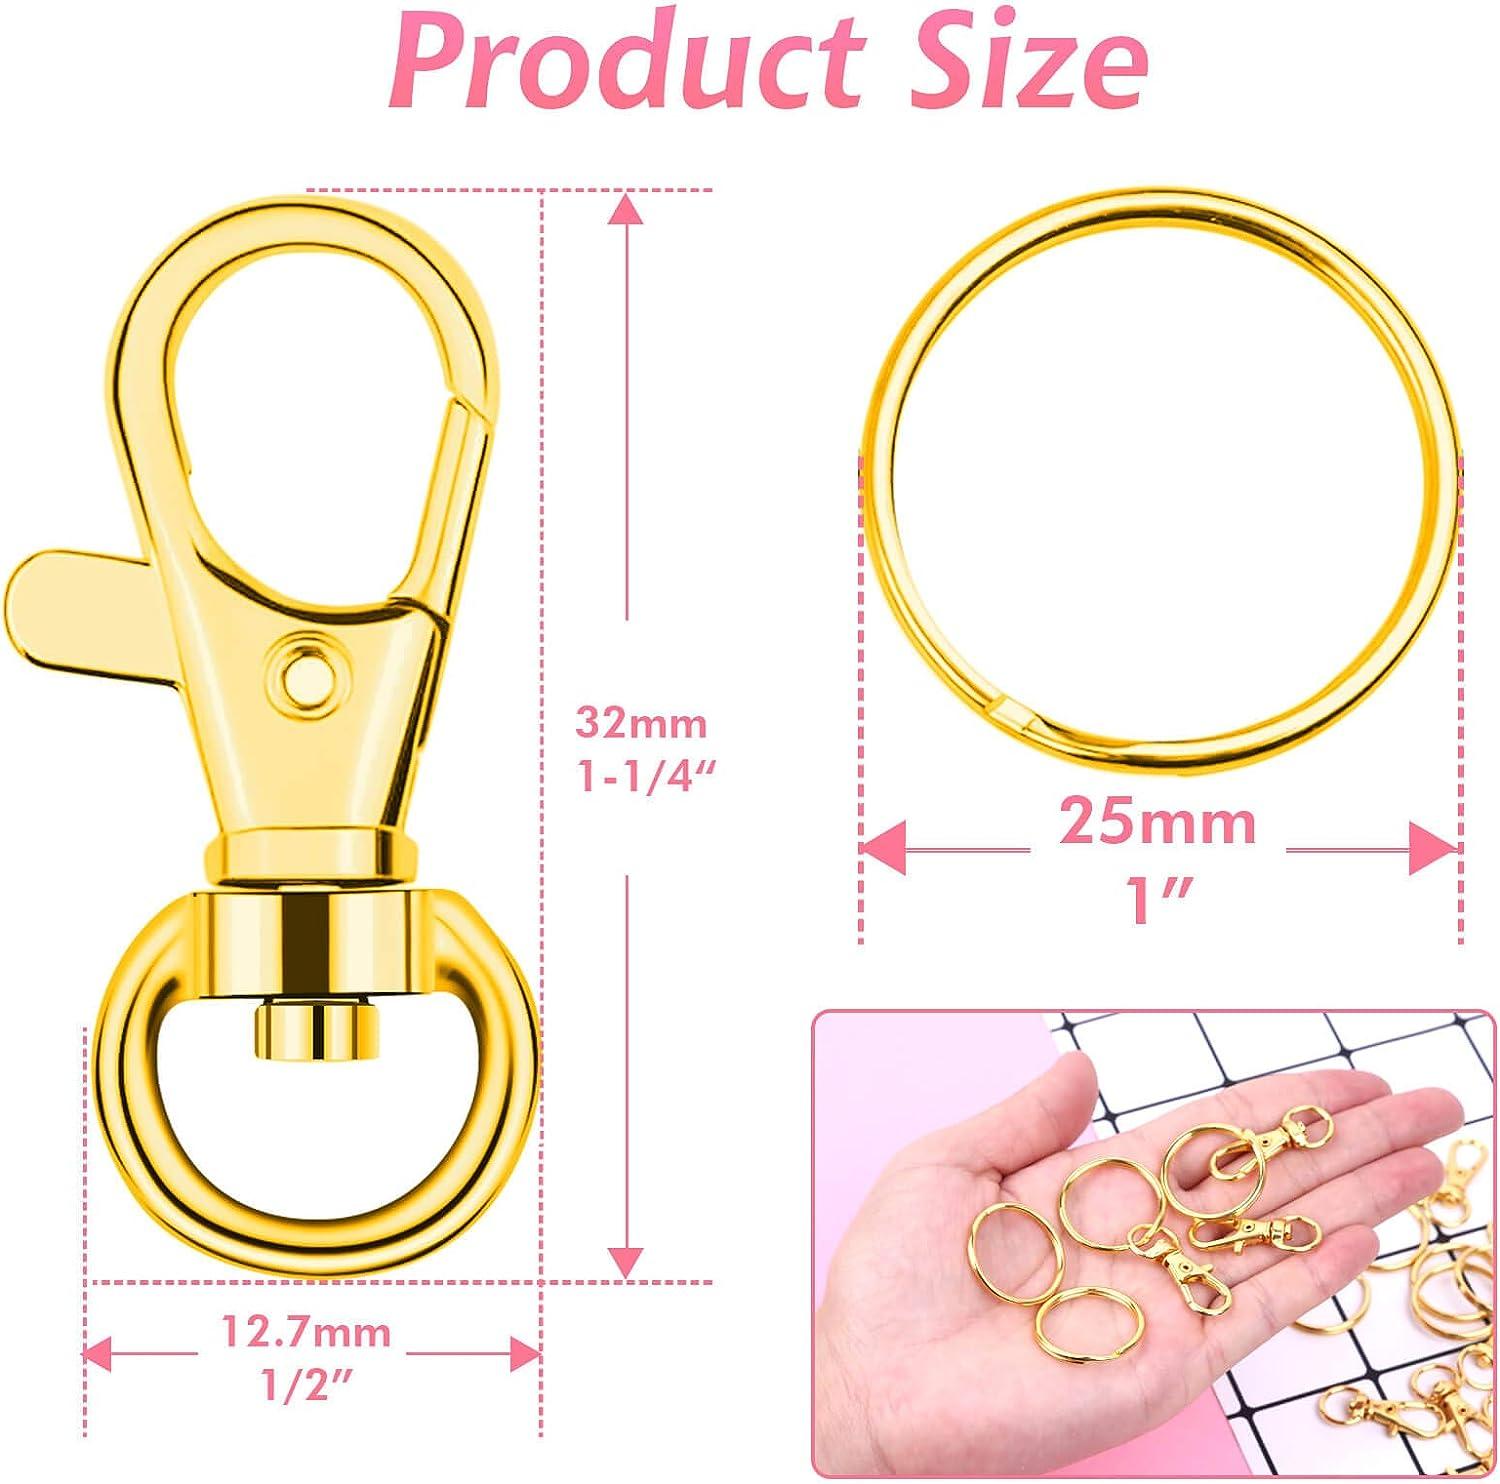 Keychain Making Supplies, 50Pcs Keychains with Chain and 50 Pcs